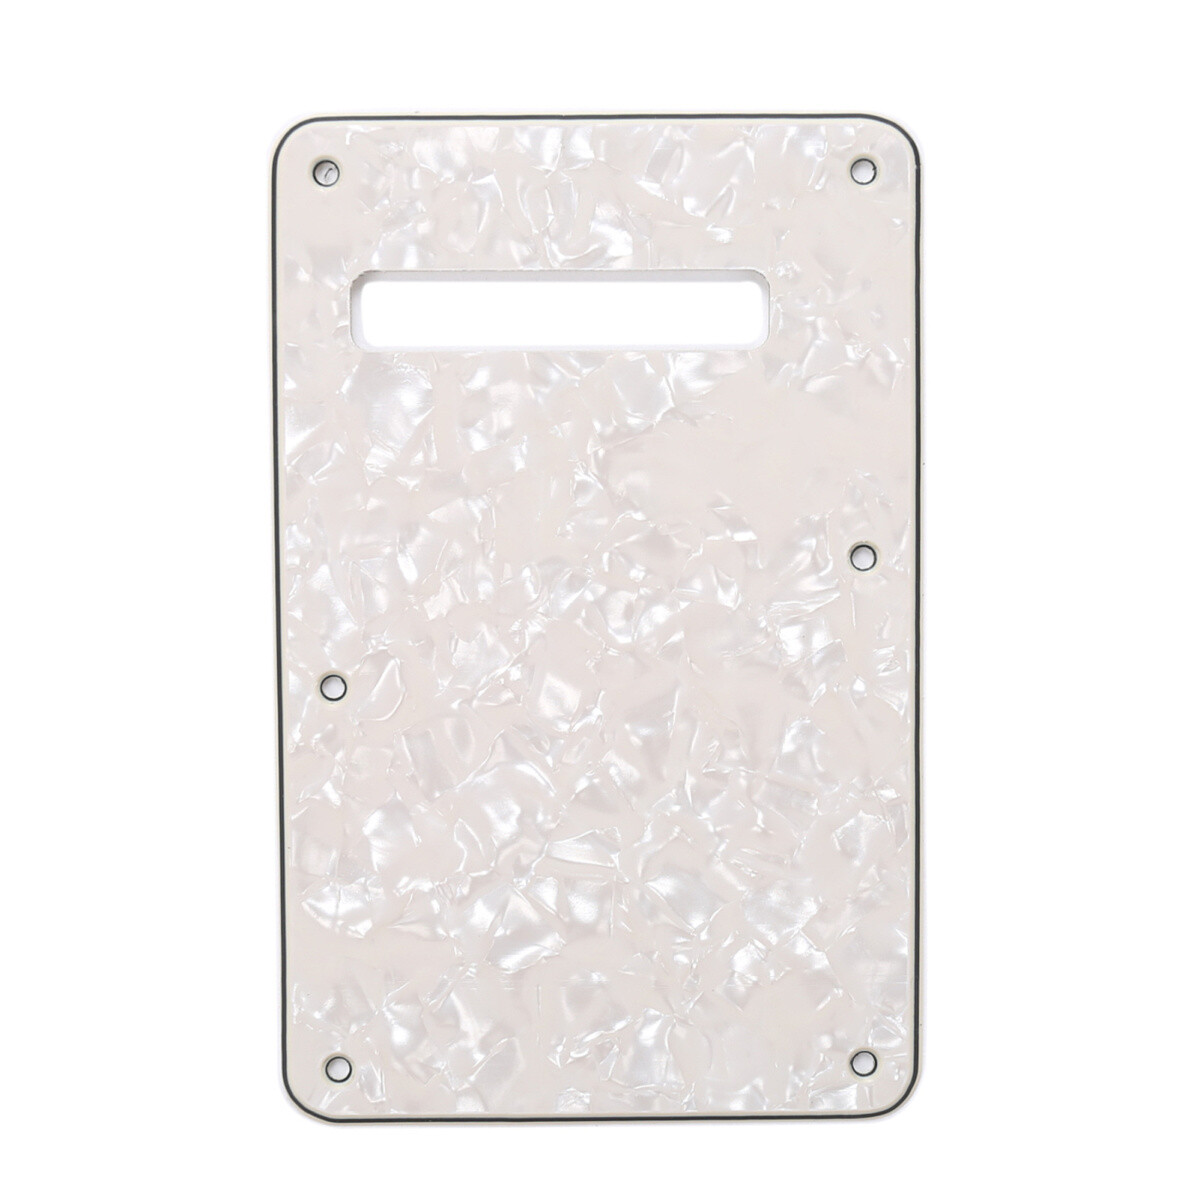 Brio Pearl Aged White Modern Style Back Plate Tremolo Cover 3 ply - US/Mexican Fender®Strat® Fit